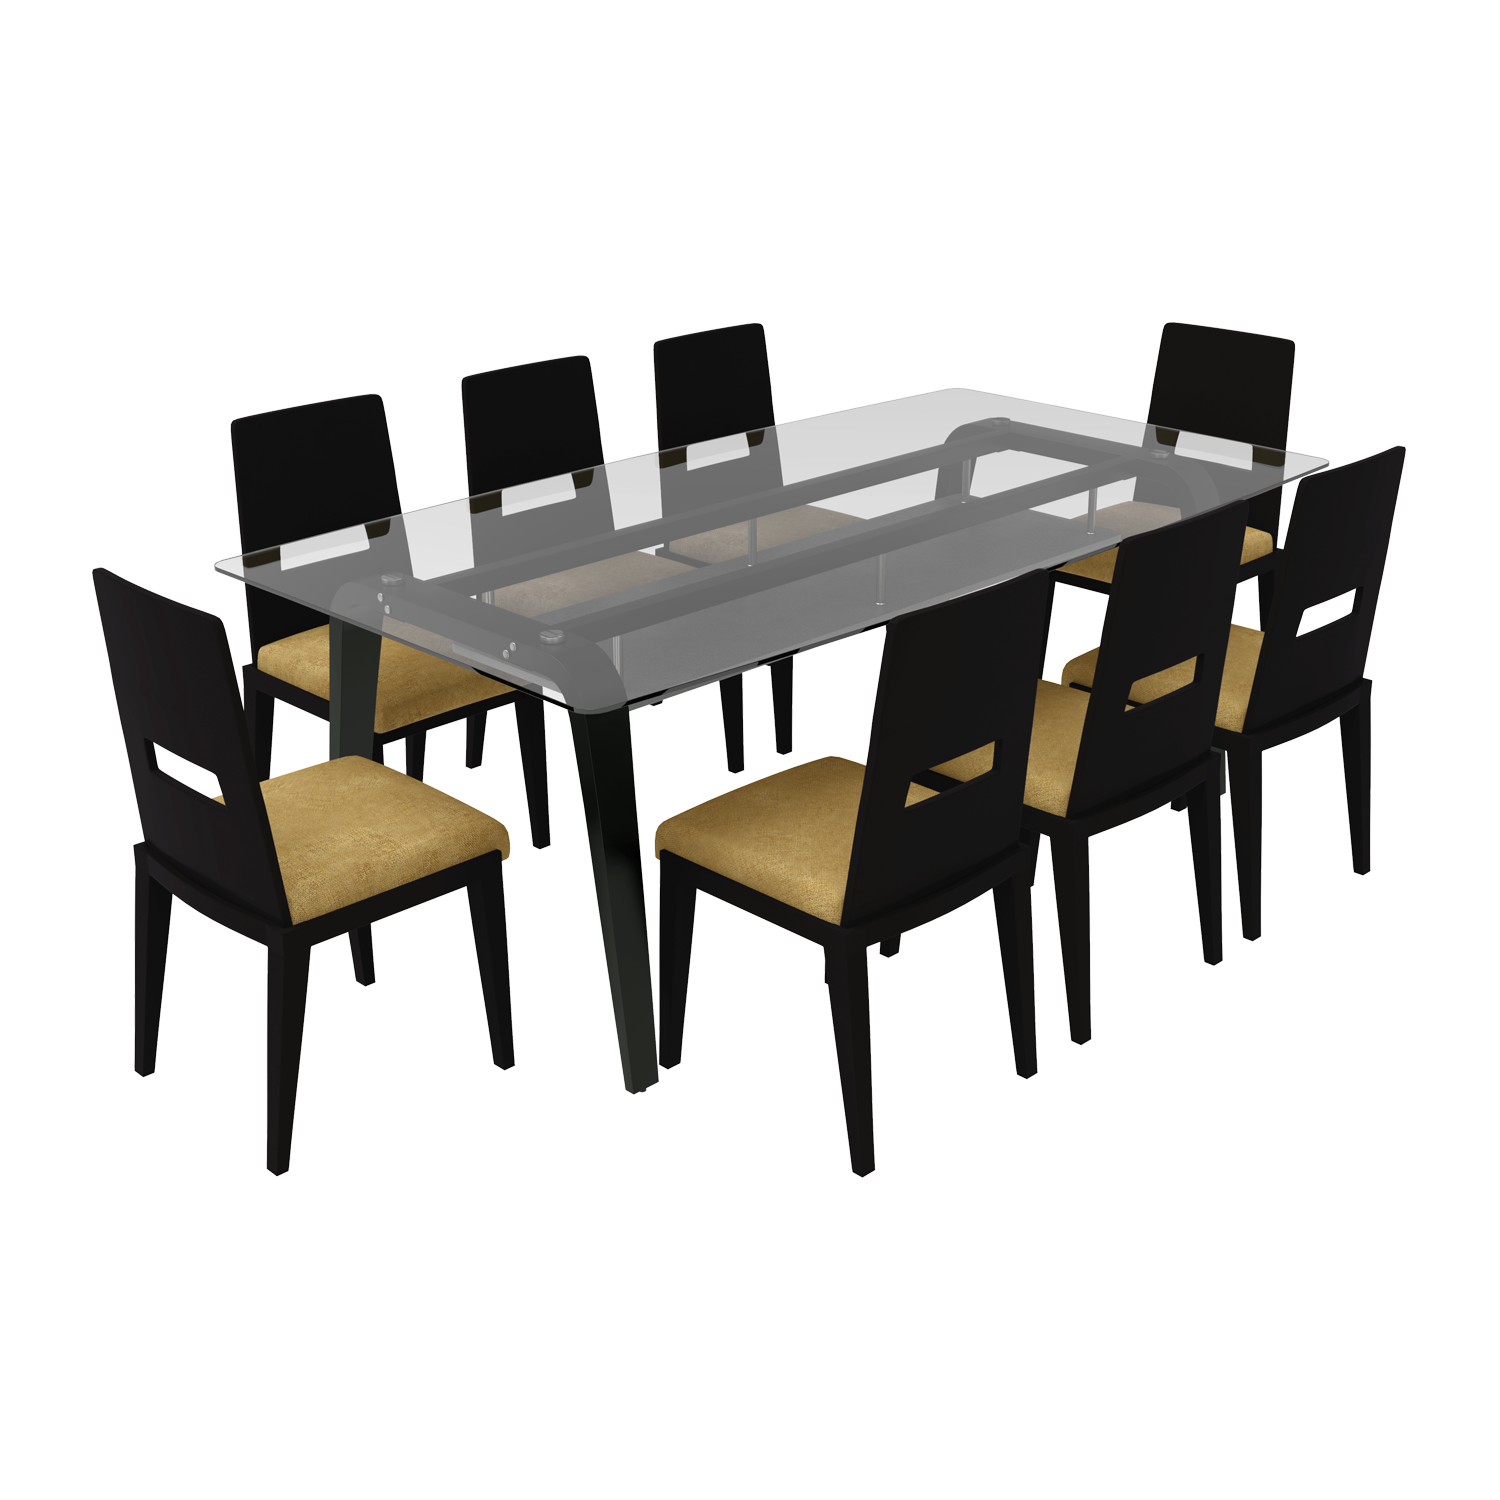 Crescent 8 Seater Dining Table Set, Dining Room Sets For 8